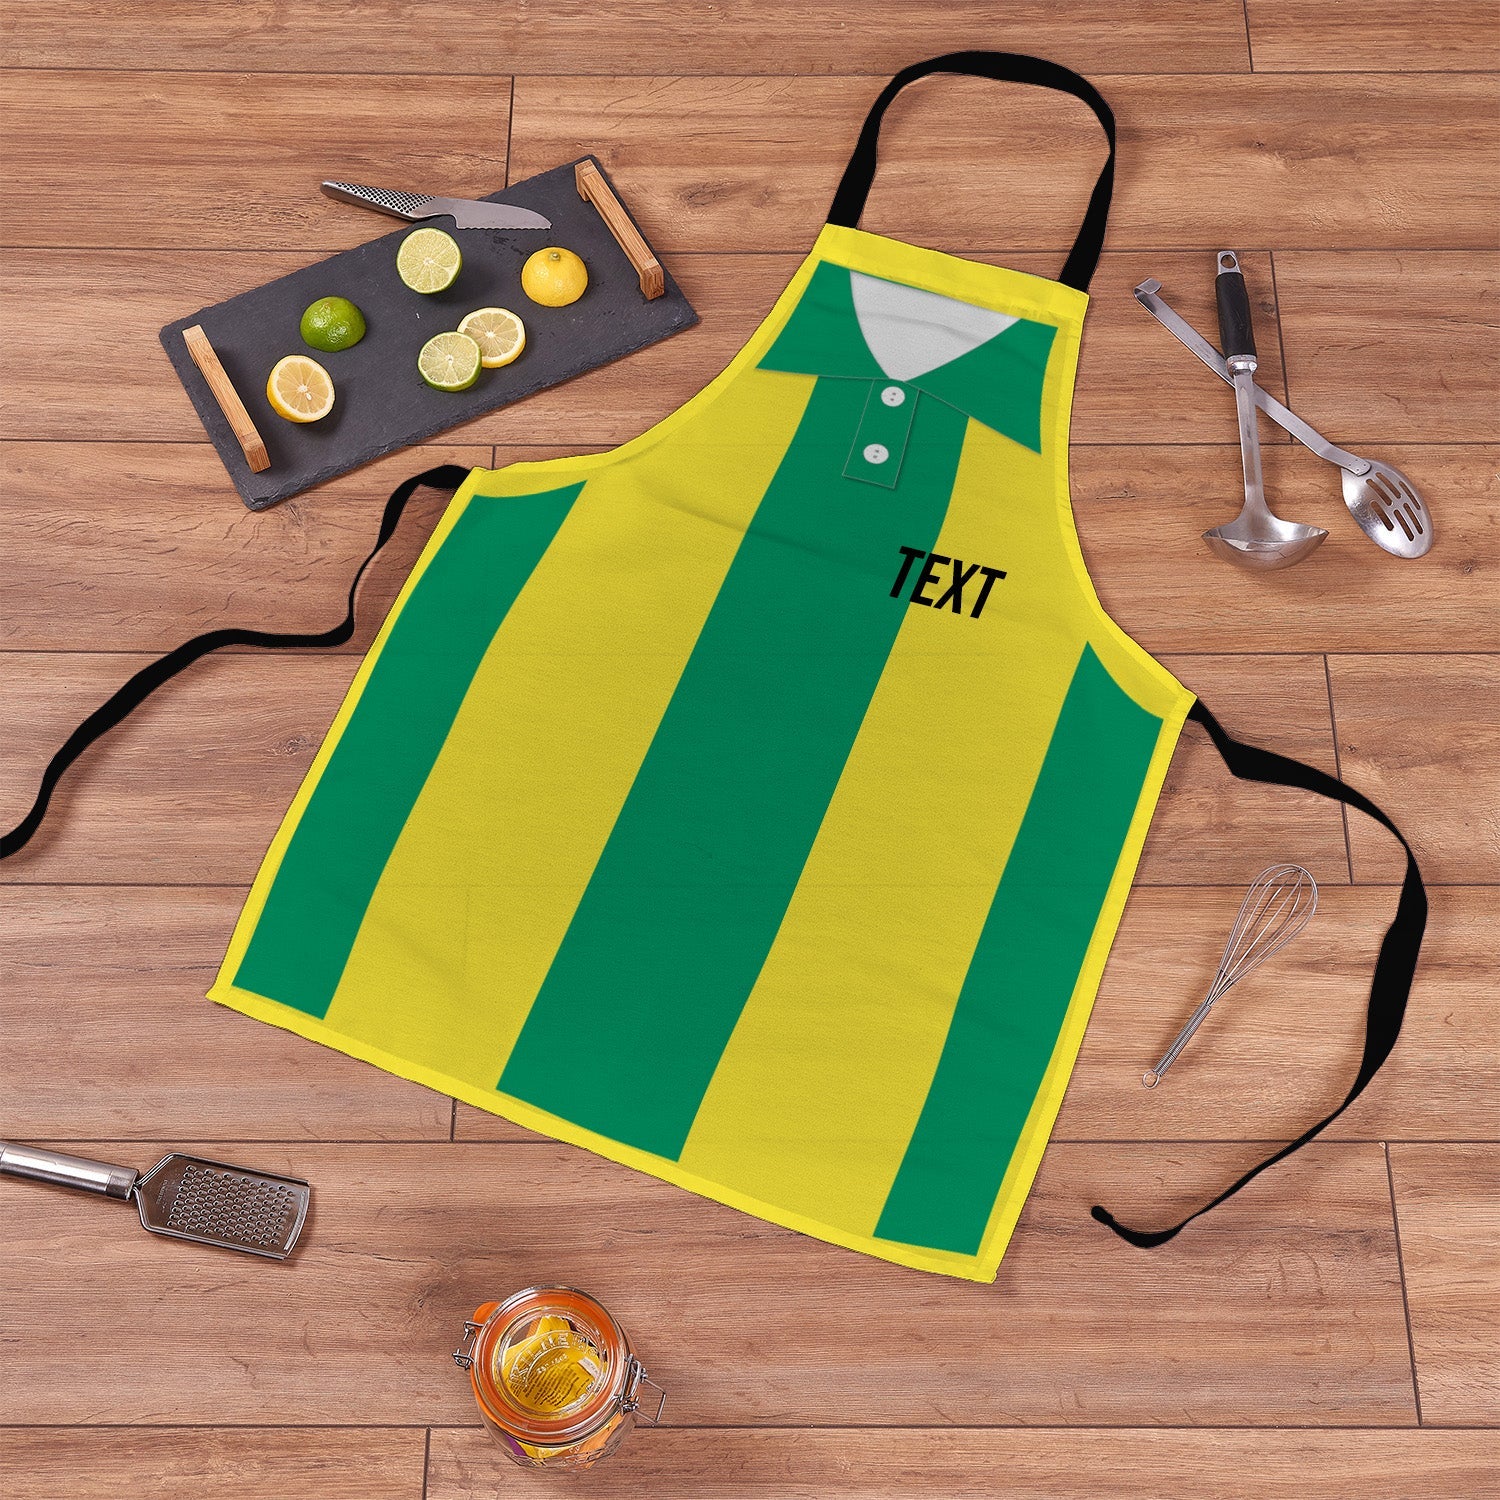 West Bromwhich - 1978 - Away Shirt - Personalised Retro Football Apron